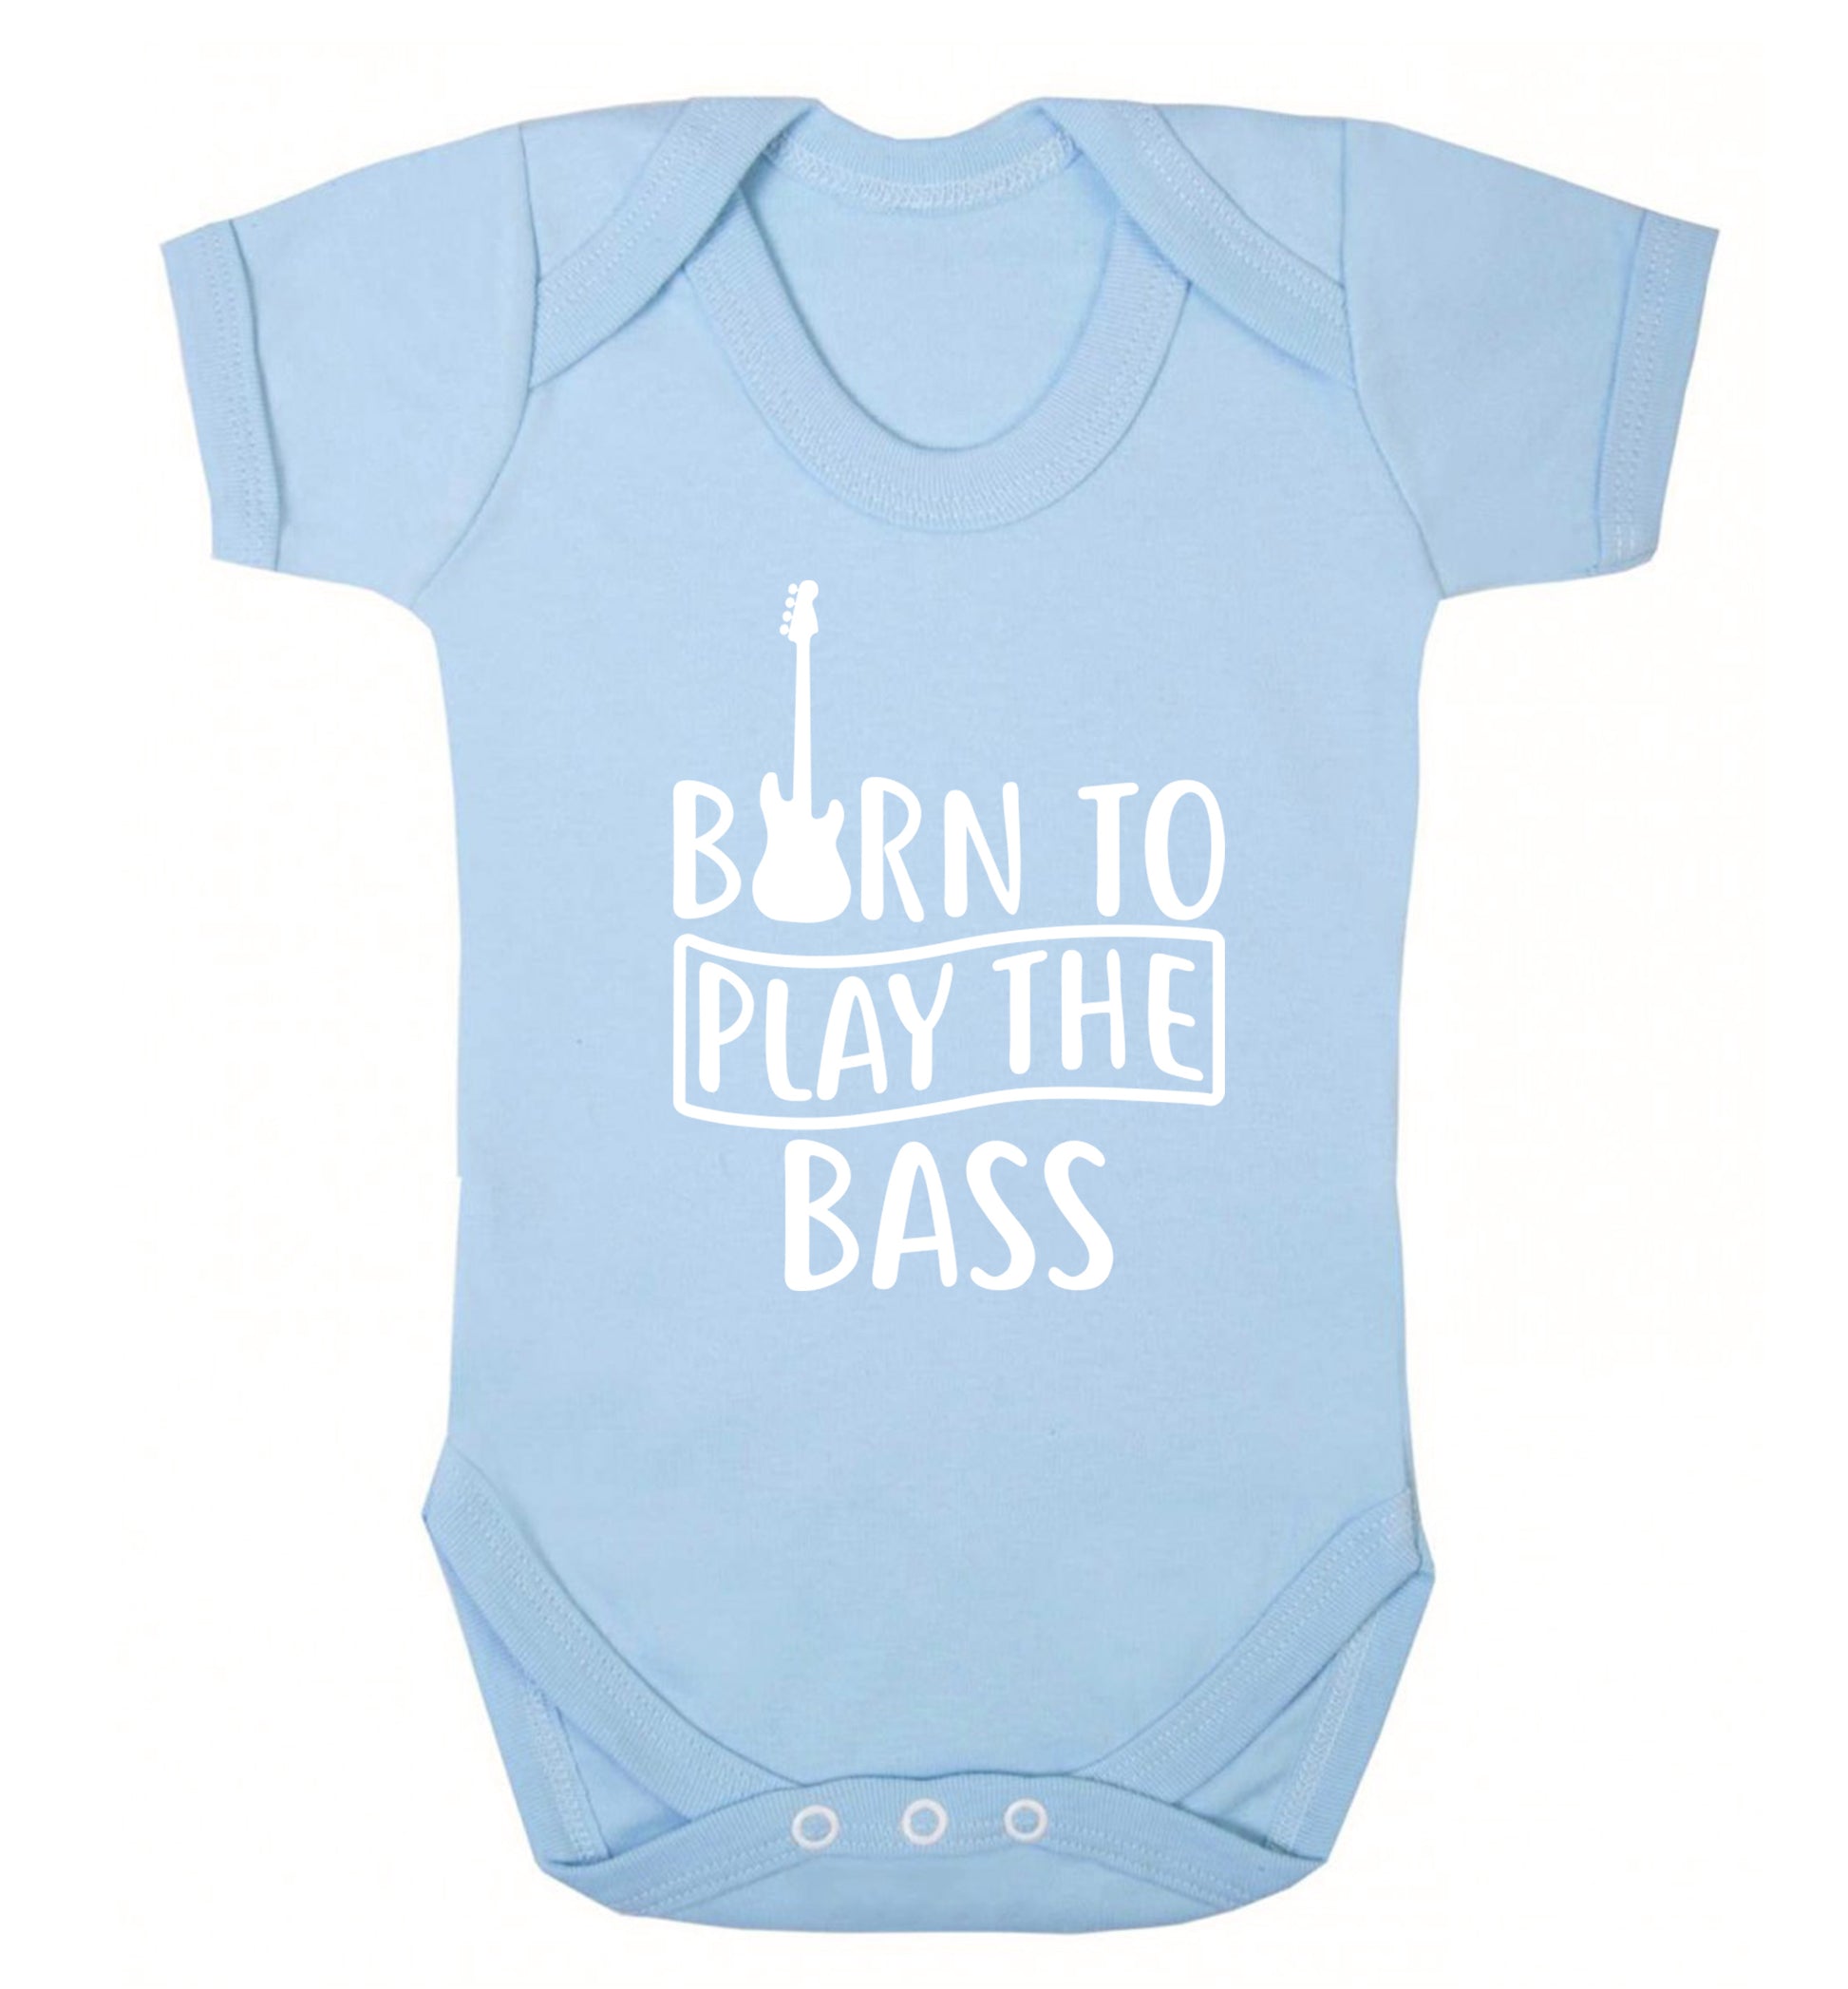 Born to play the bass Baby Vest pale blue 18-24 months